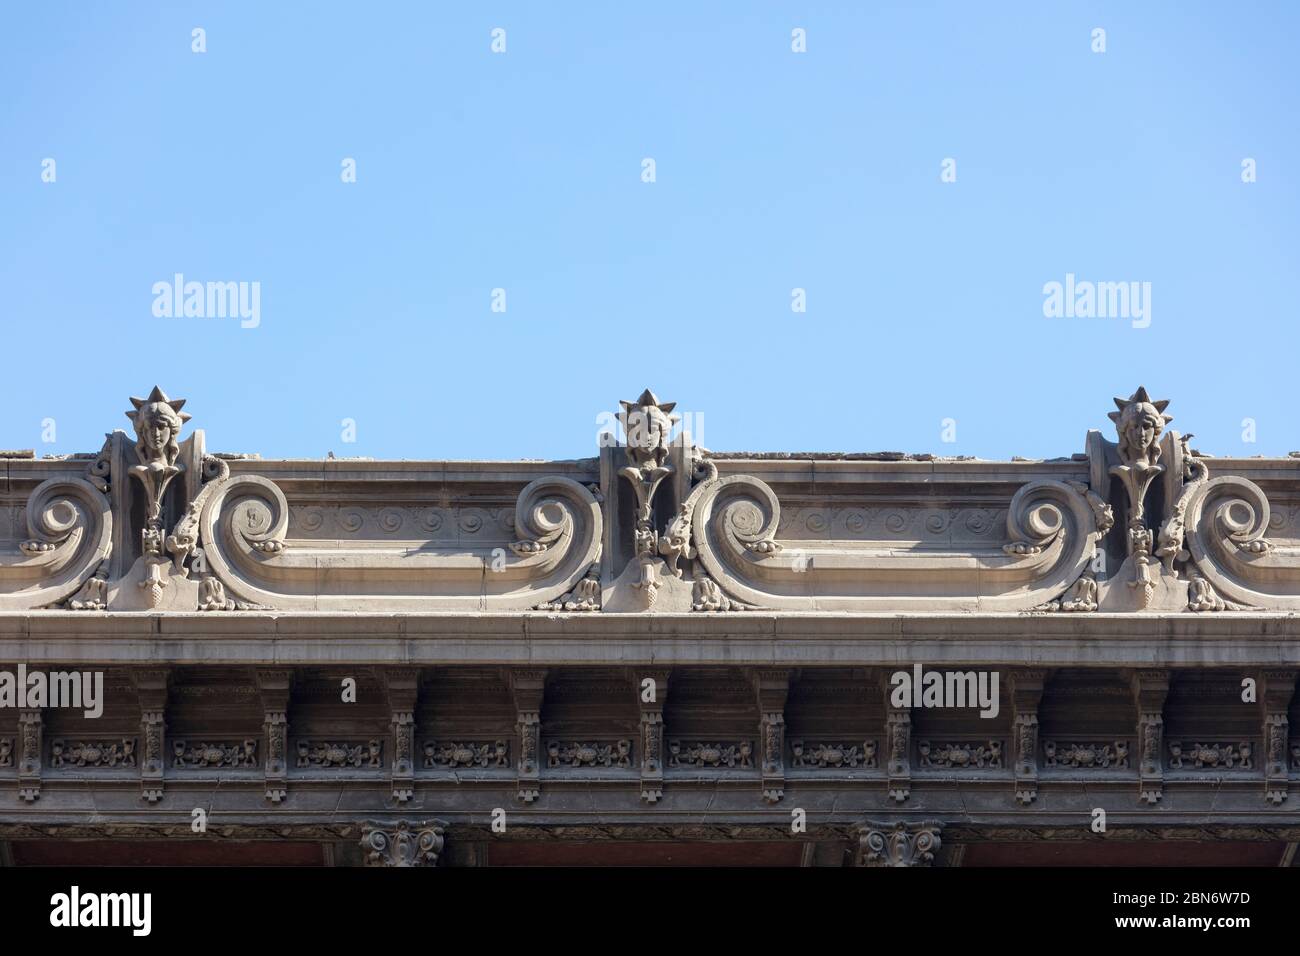 detail of palace of Said Halim Pasha, built in 1899, Cairo, Egypt Stock Photo